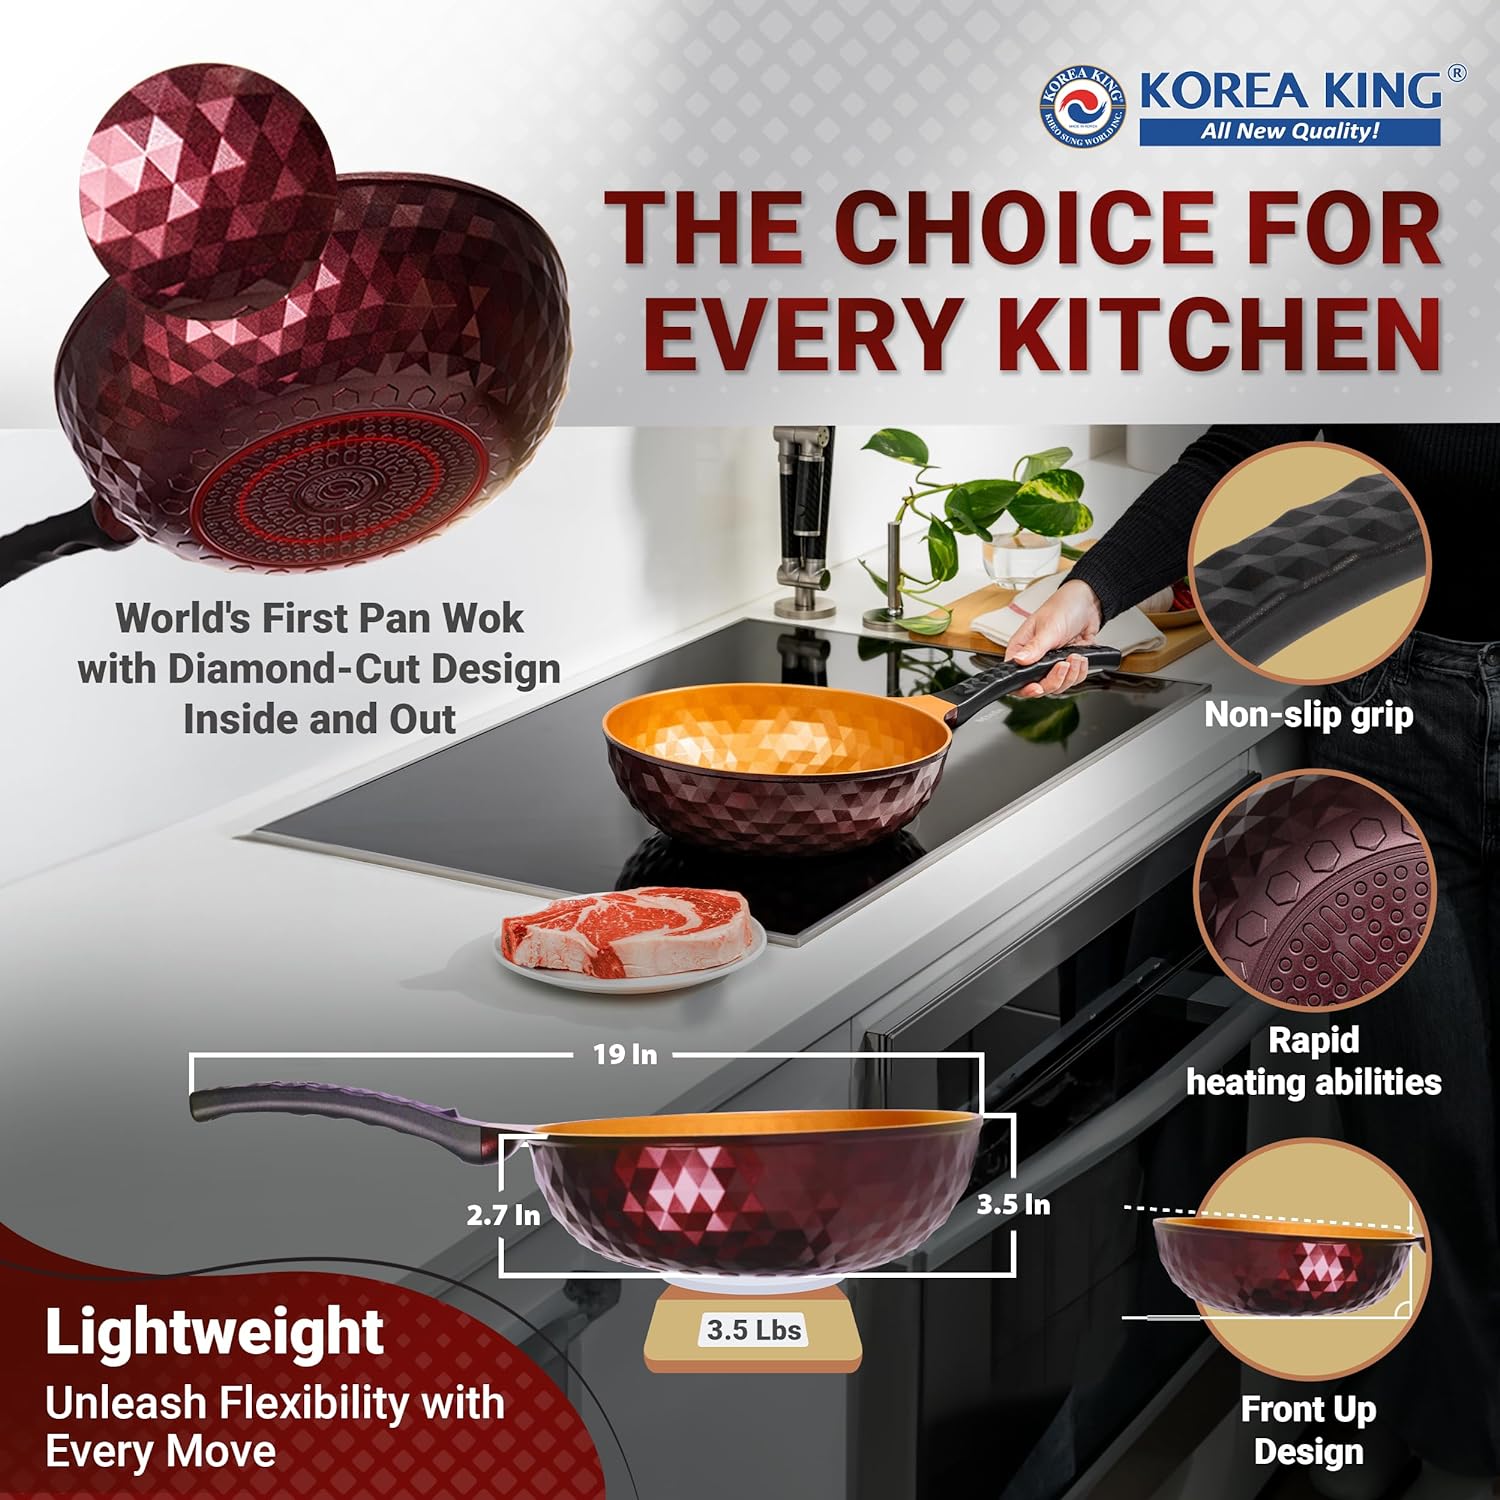 KOREA KING Premium Non Stick Frying Wok Pan Hybrid, Titanium-Coated Nonstick Skillet Lid-Free, Induction Cookware Compatible, Egg Omelet, Stir Fry Saute Pan - All in One Pan For Cooking - 11 inch